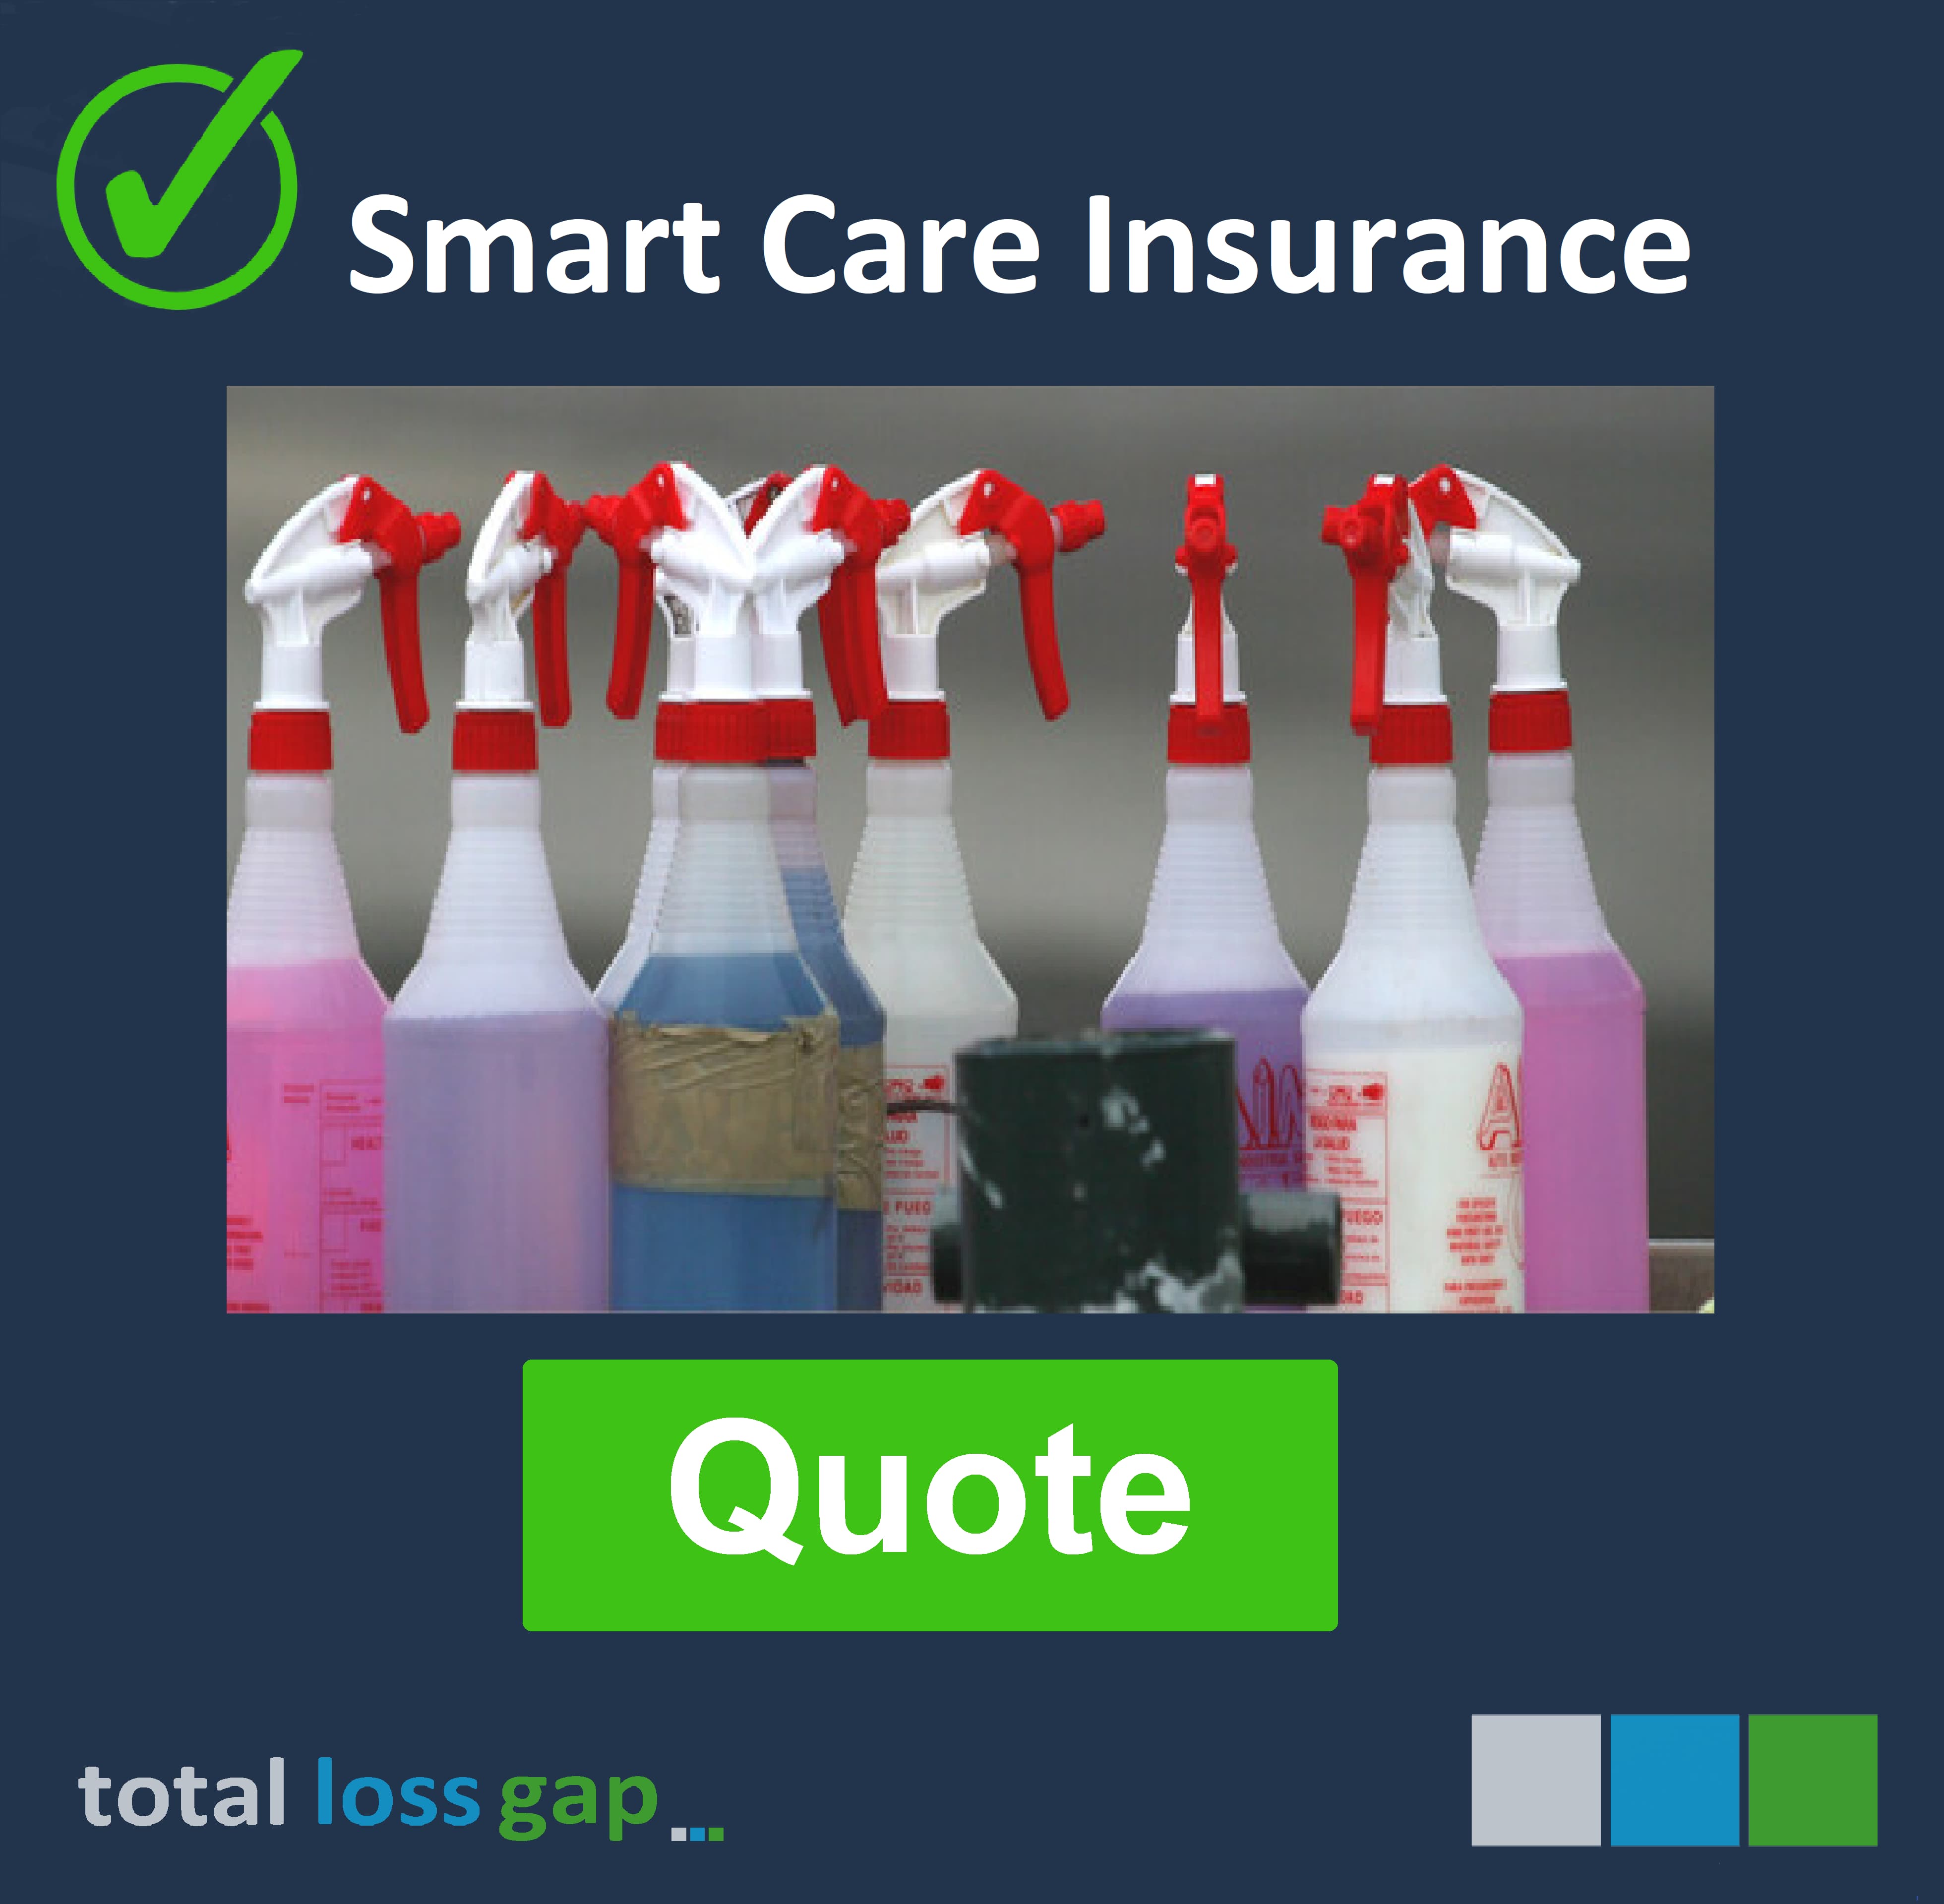 Smart Care Insurance for your vehicle